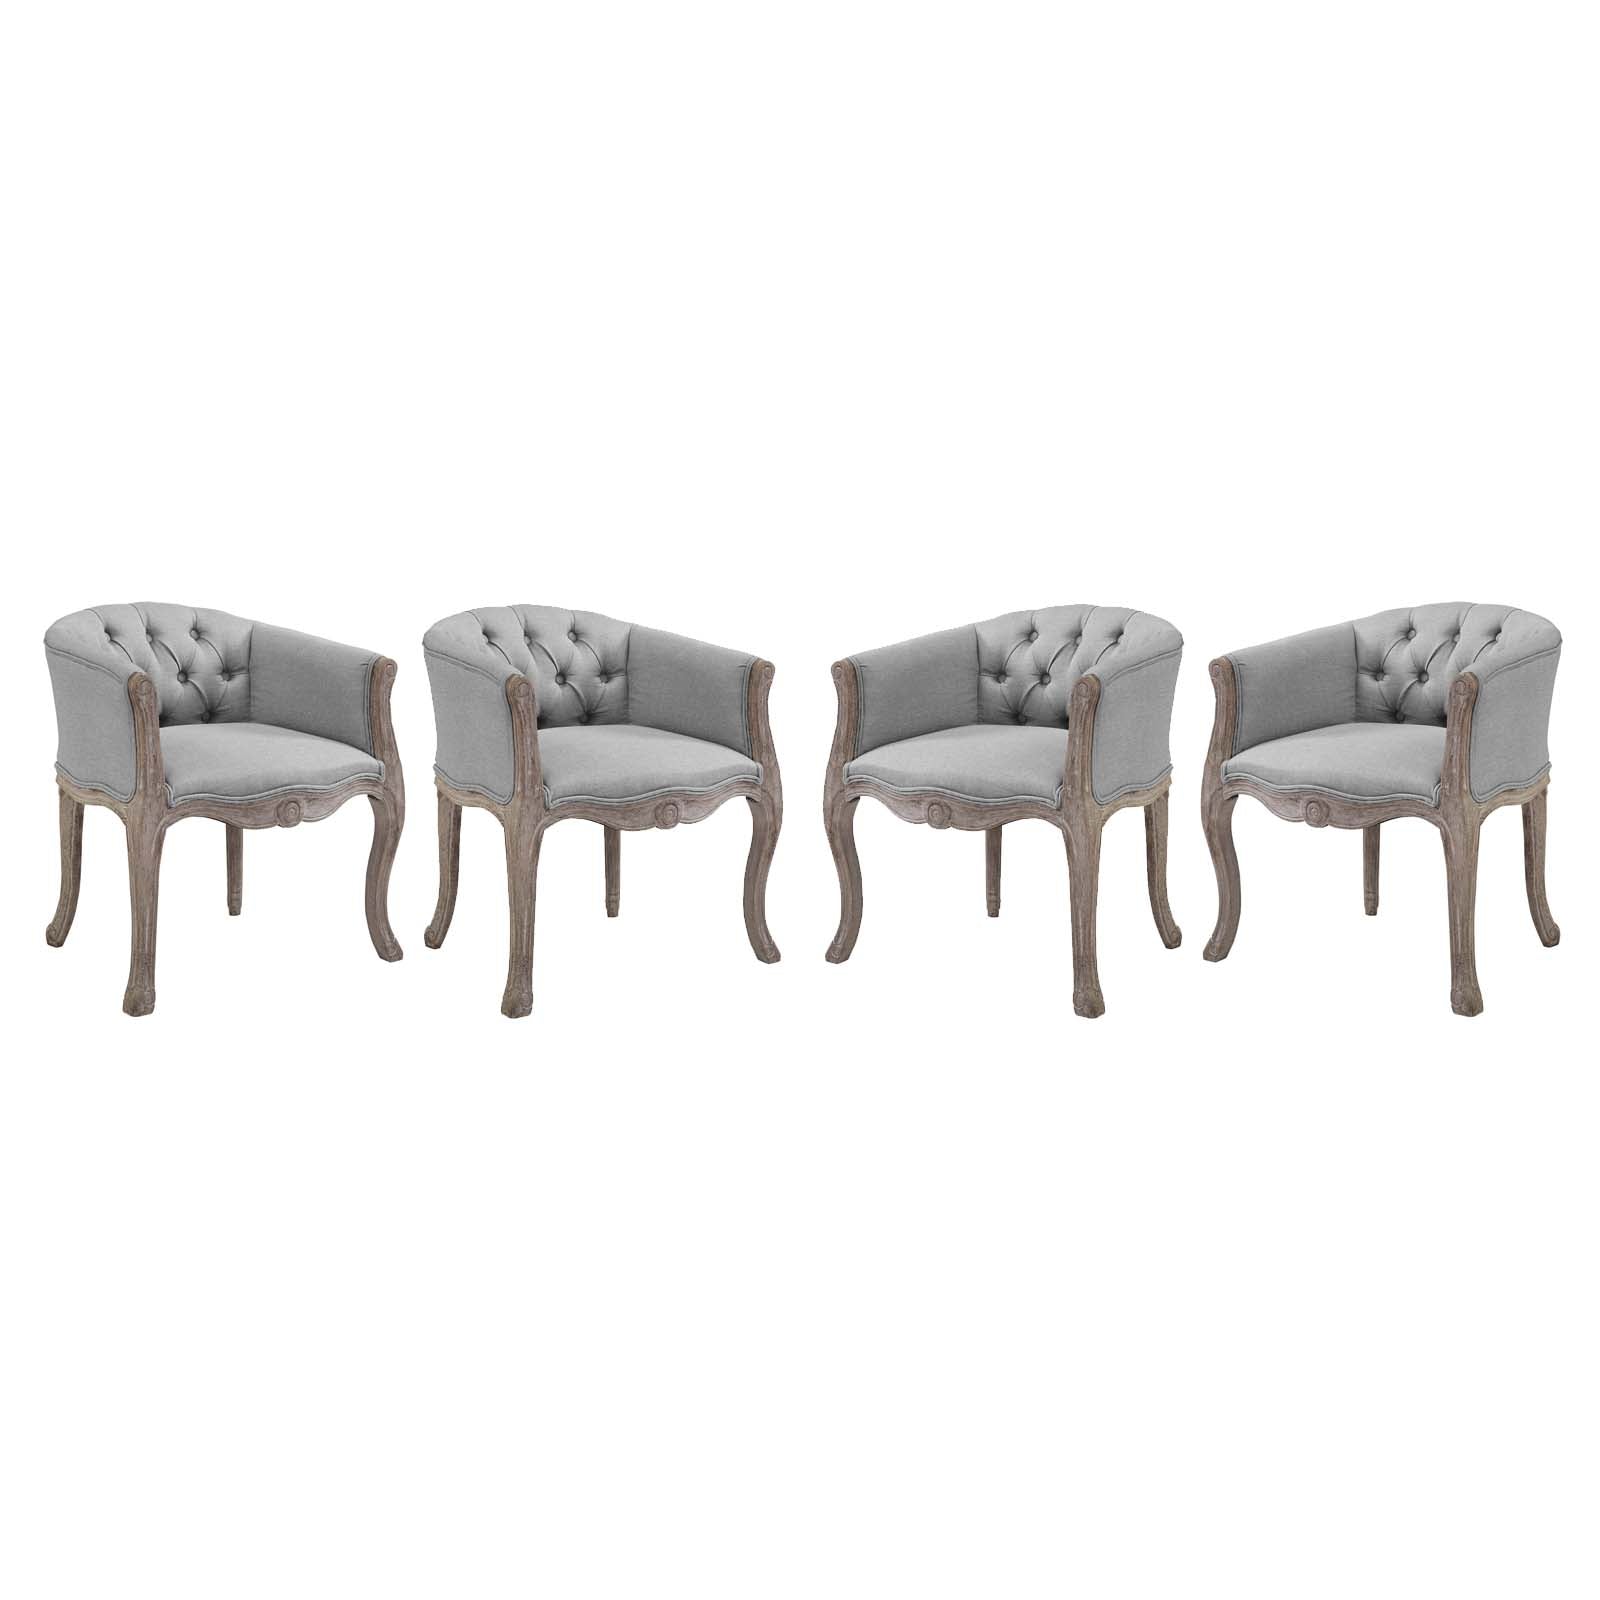 Crown Dining Armchair Upholstered Fabric Set of 4 - East Shore Modern Home Furnishings